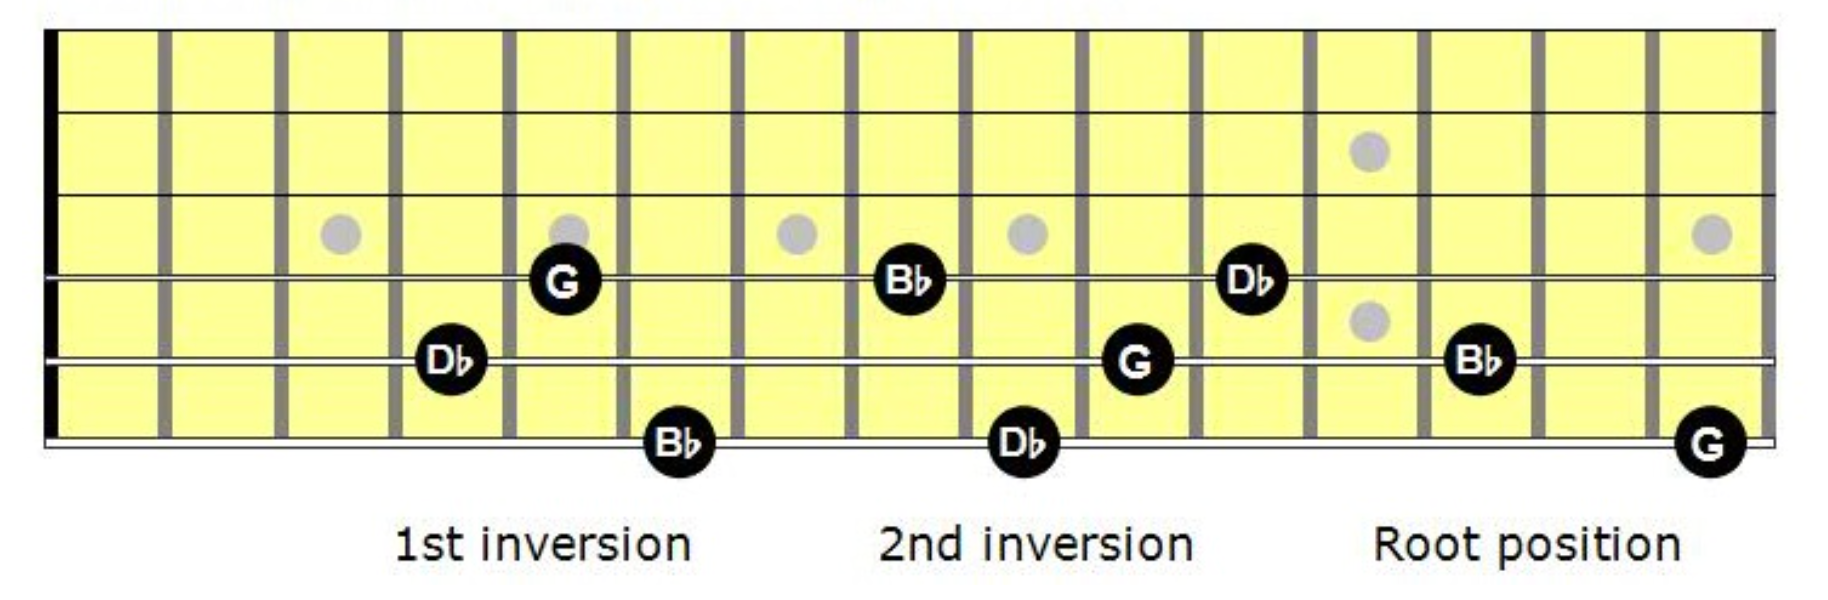 Diminished Chord Shapes on the E, A, and D Strings)